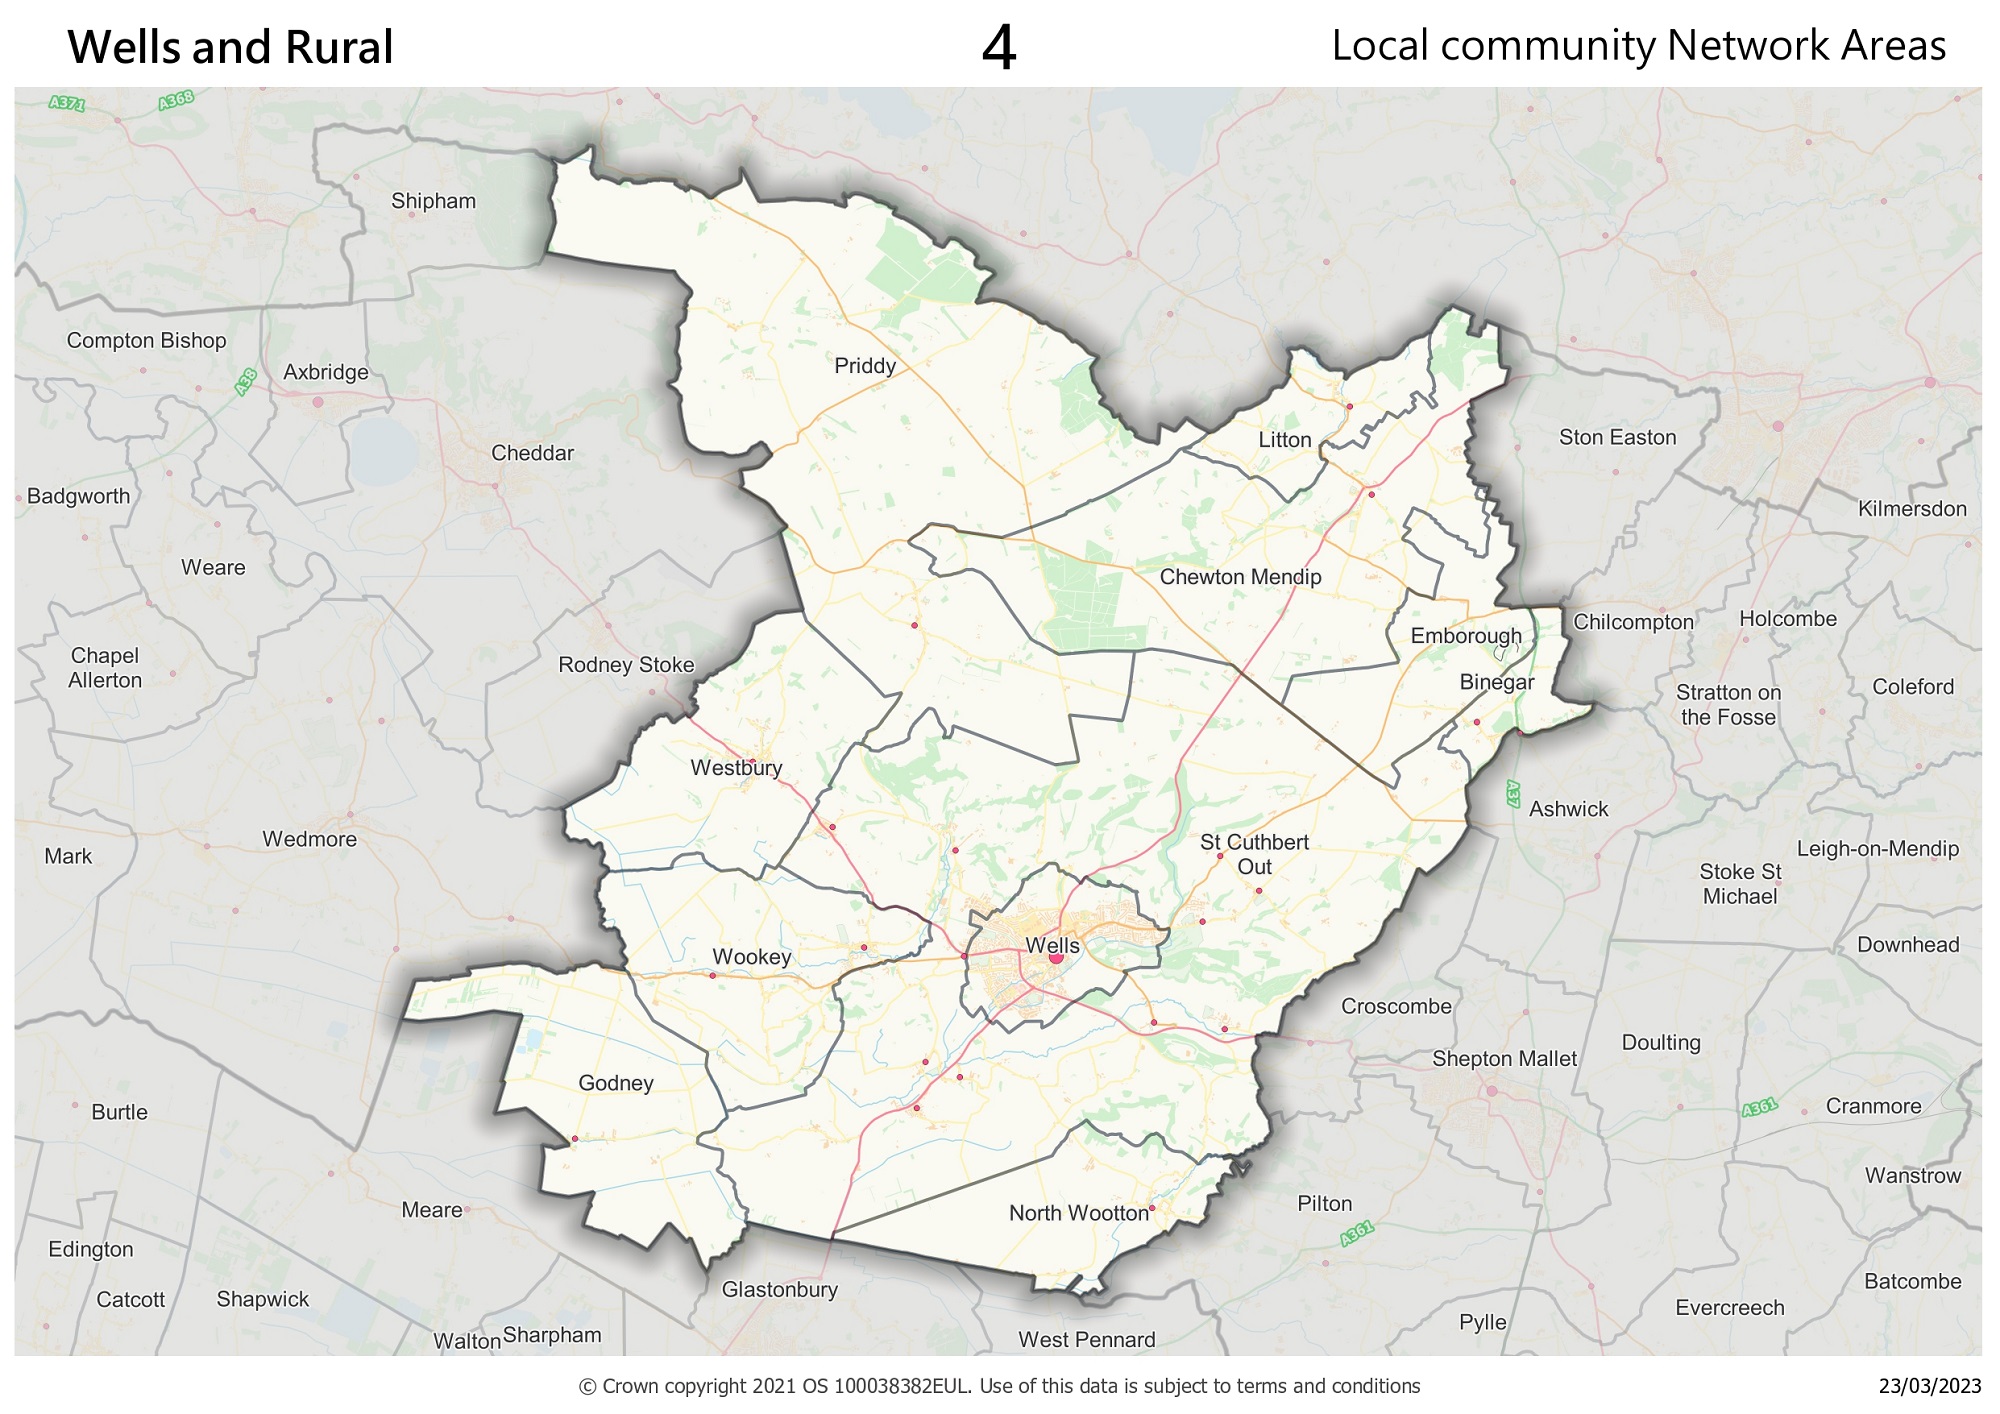 Wells and Rural local community network area map